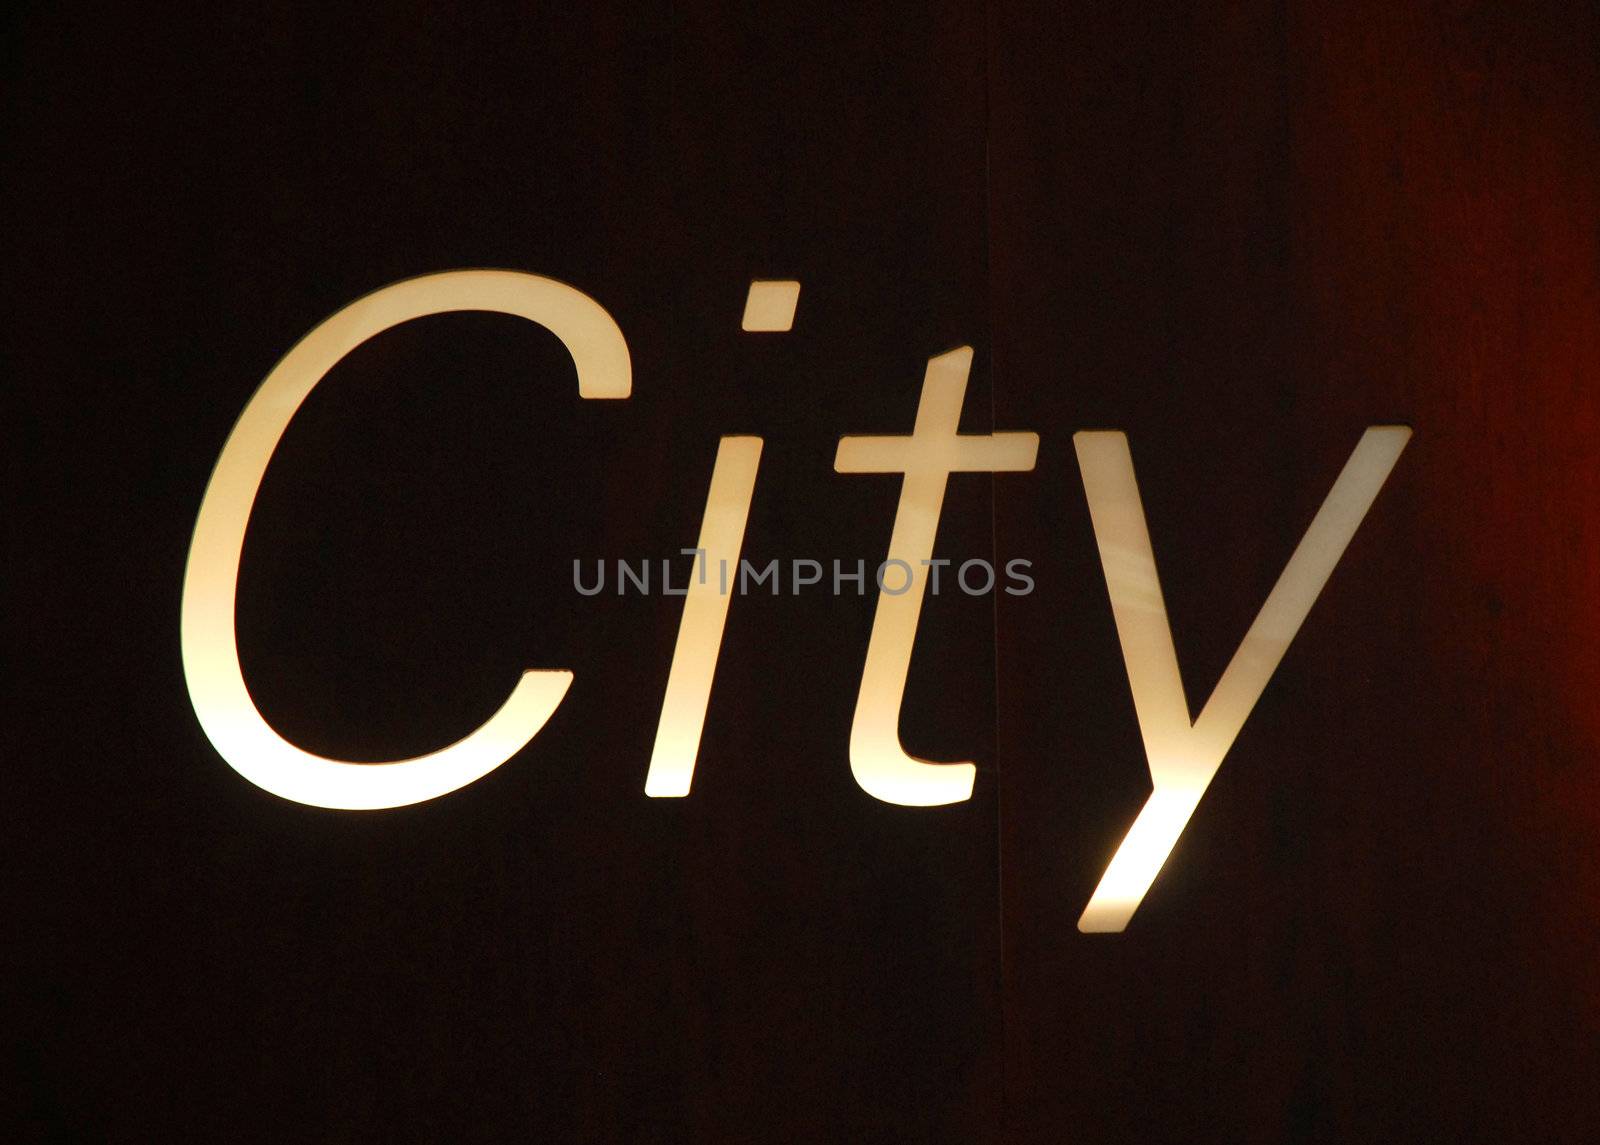 Billboard written with the word City on dark red and black tones